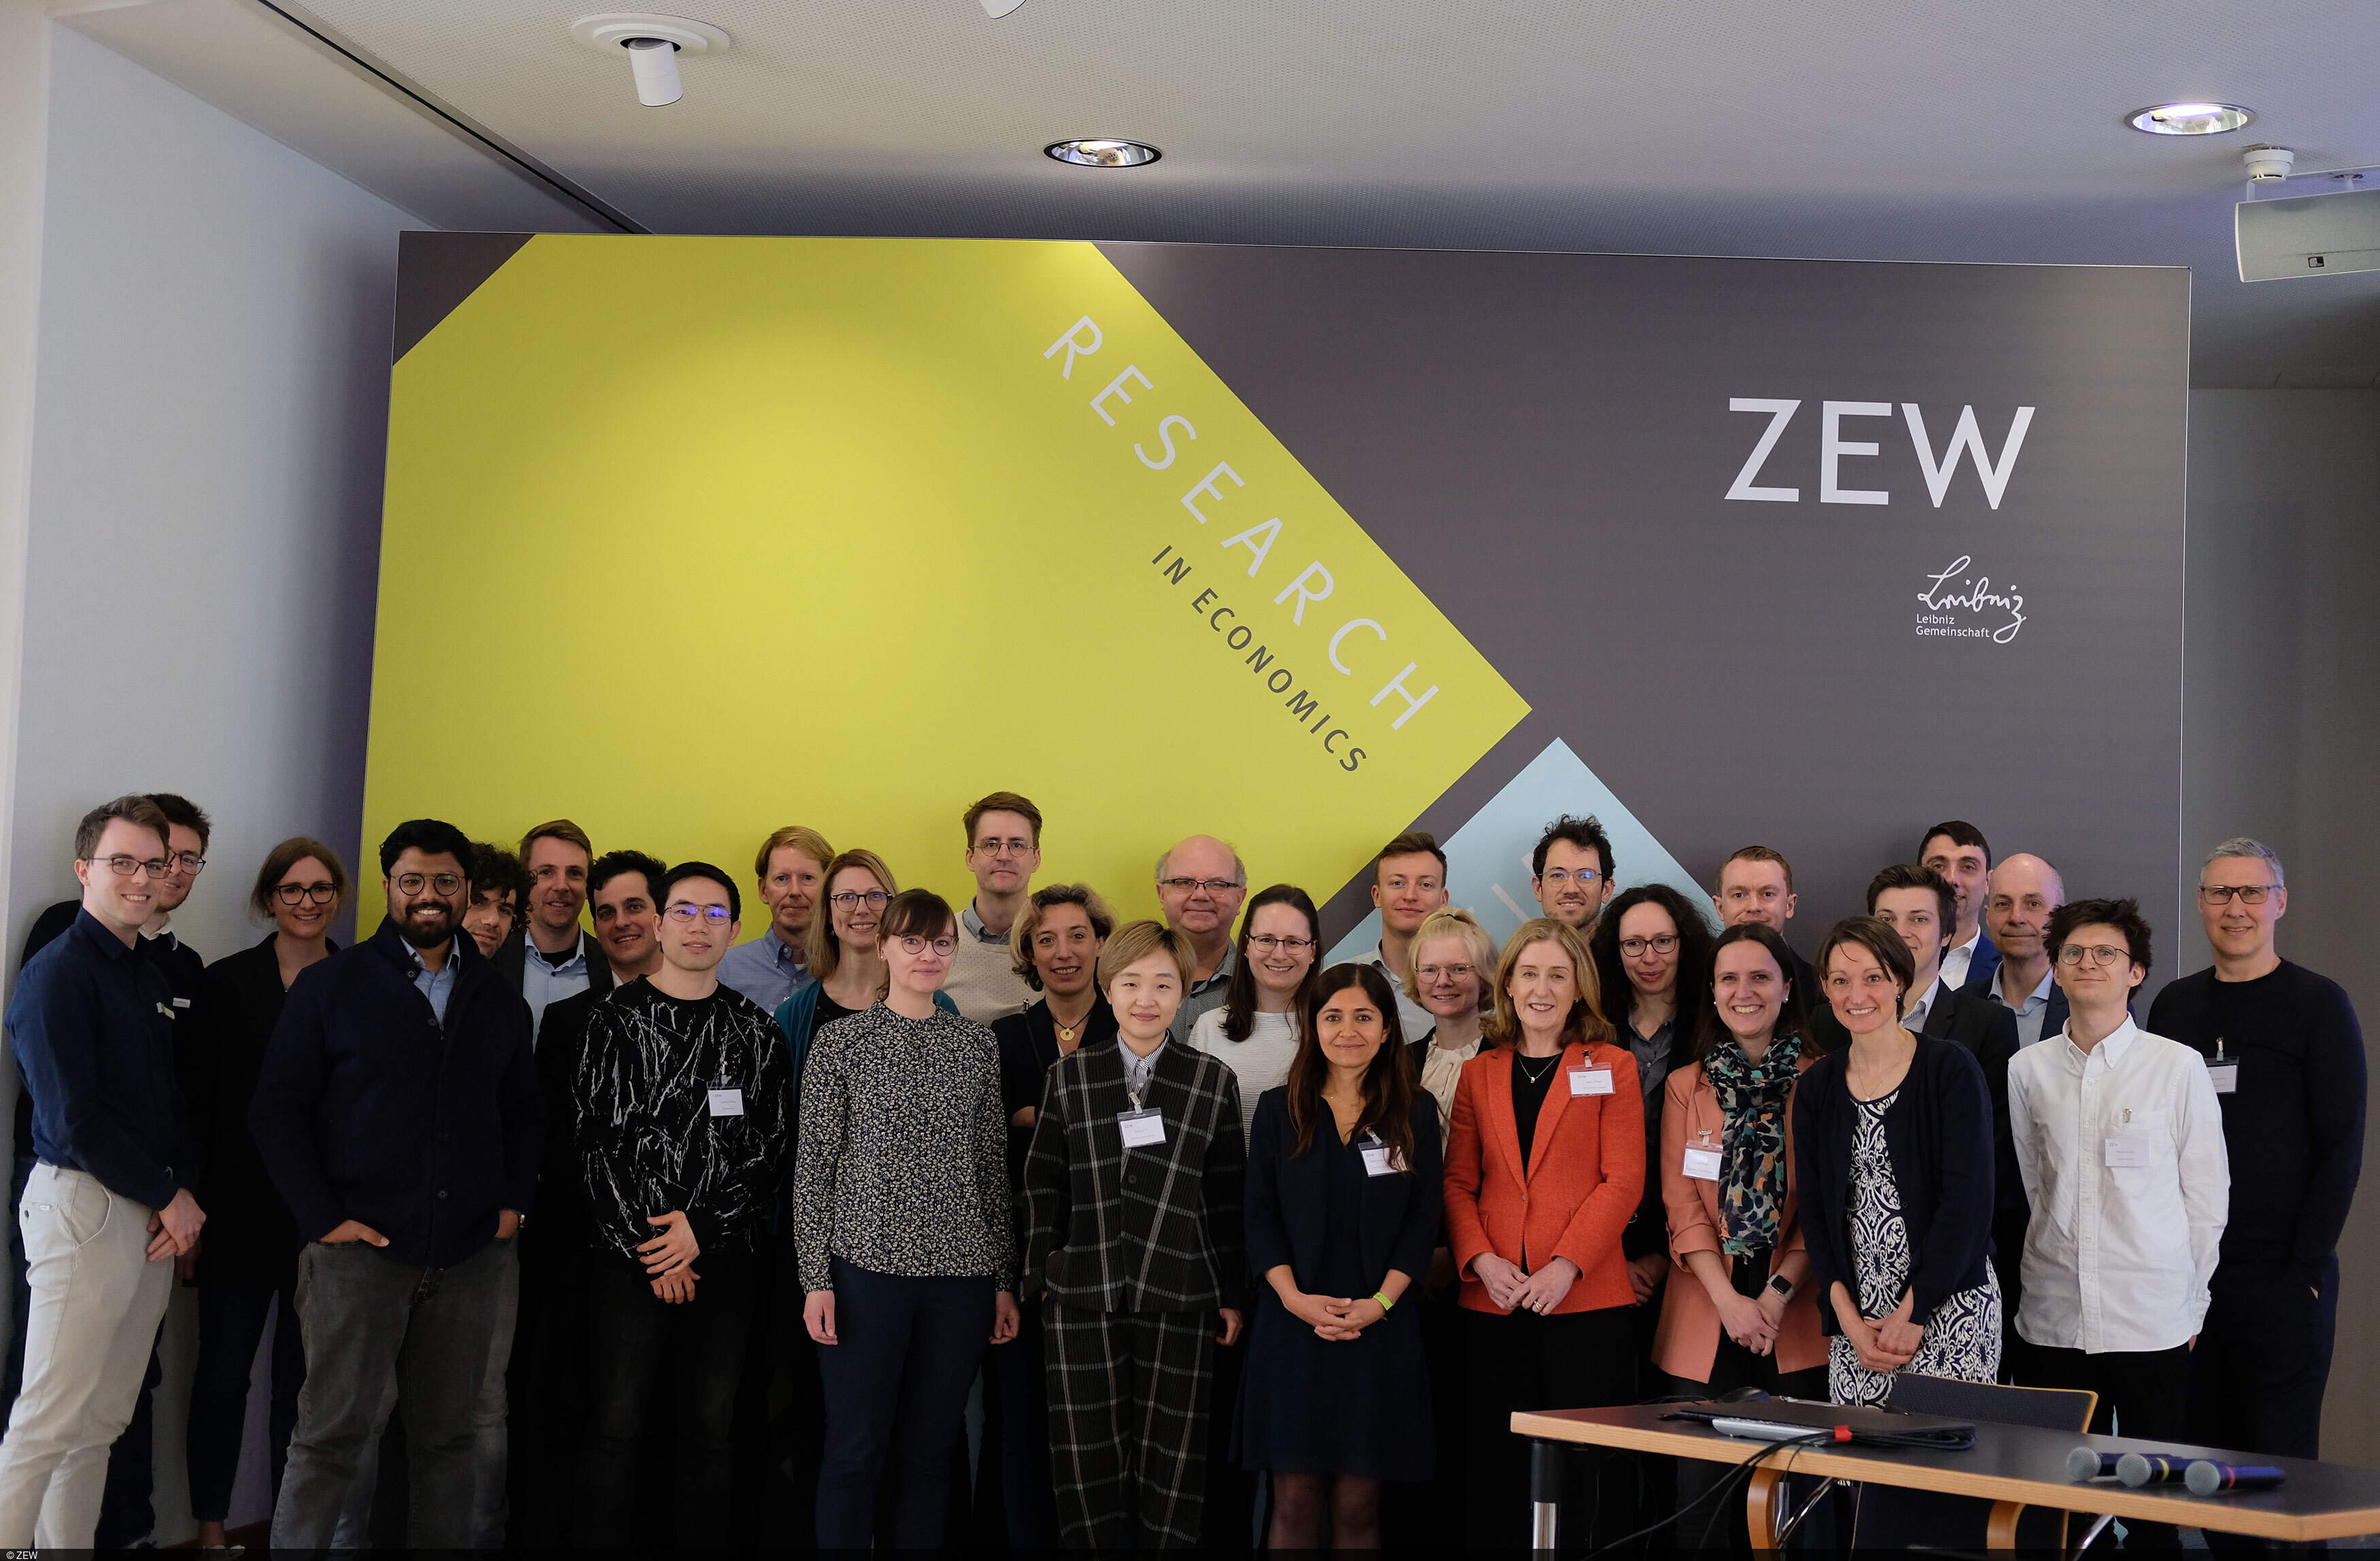 The participants of the Conference on Aging and Sustainable Finance 2023 at ZEW Mannheim.